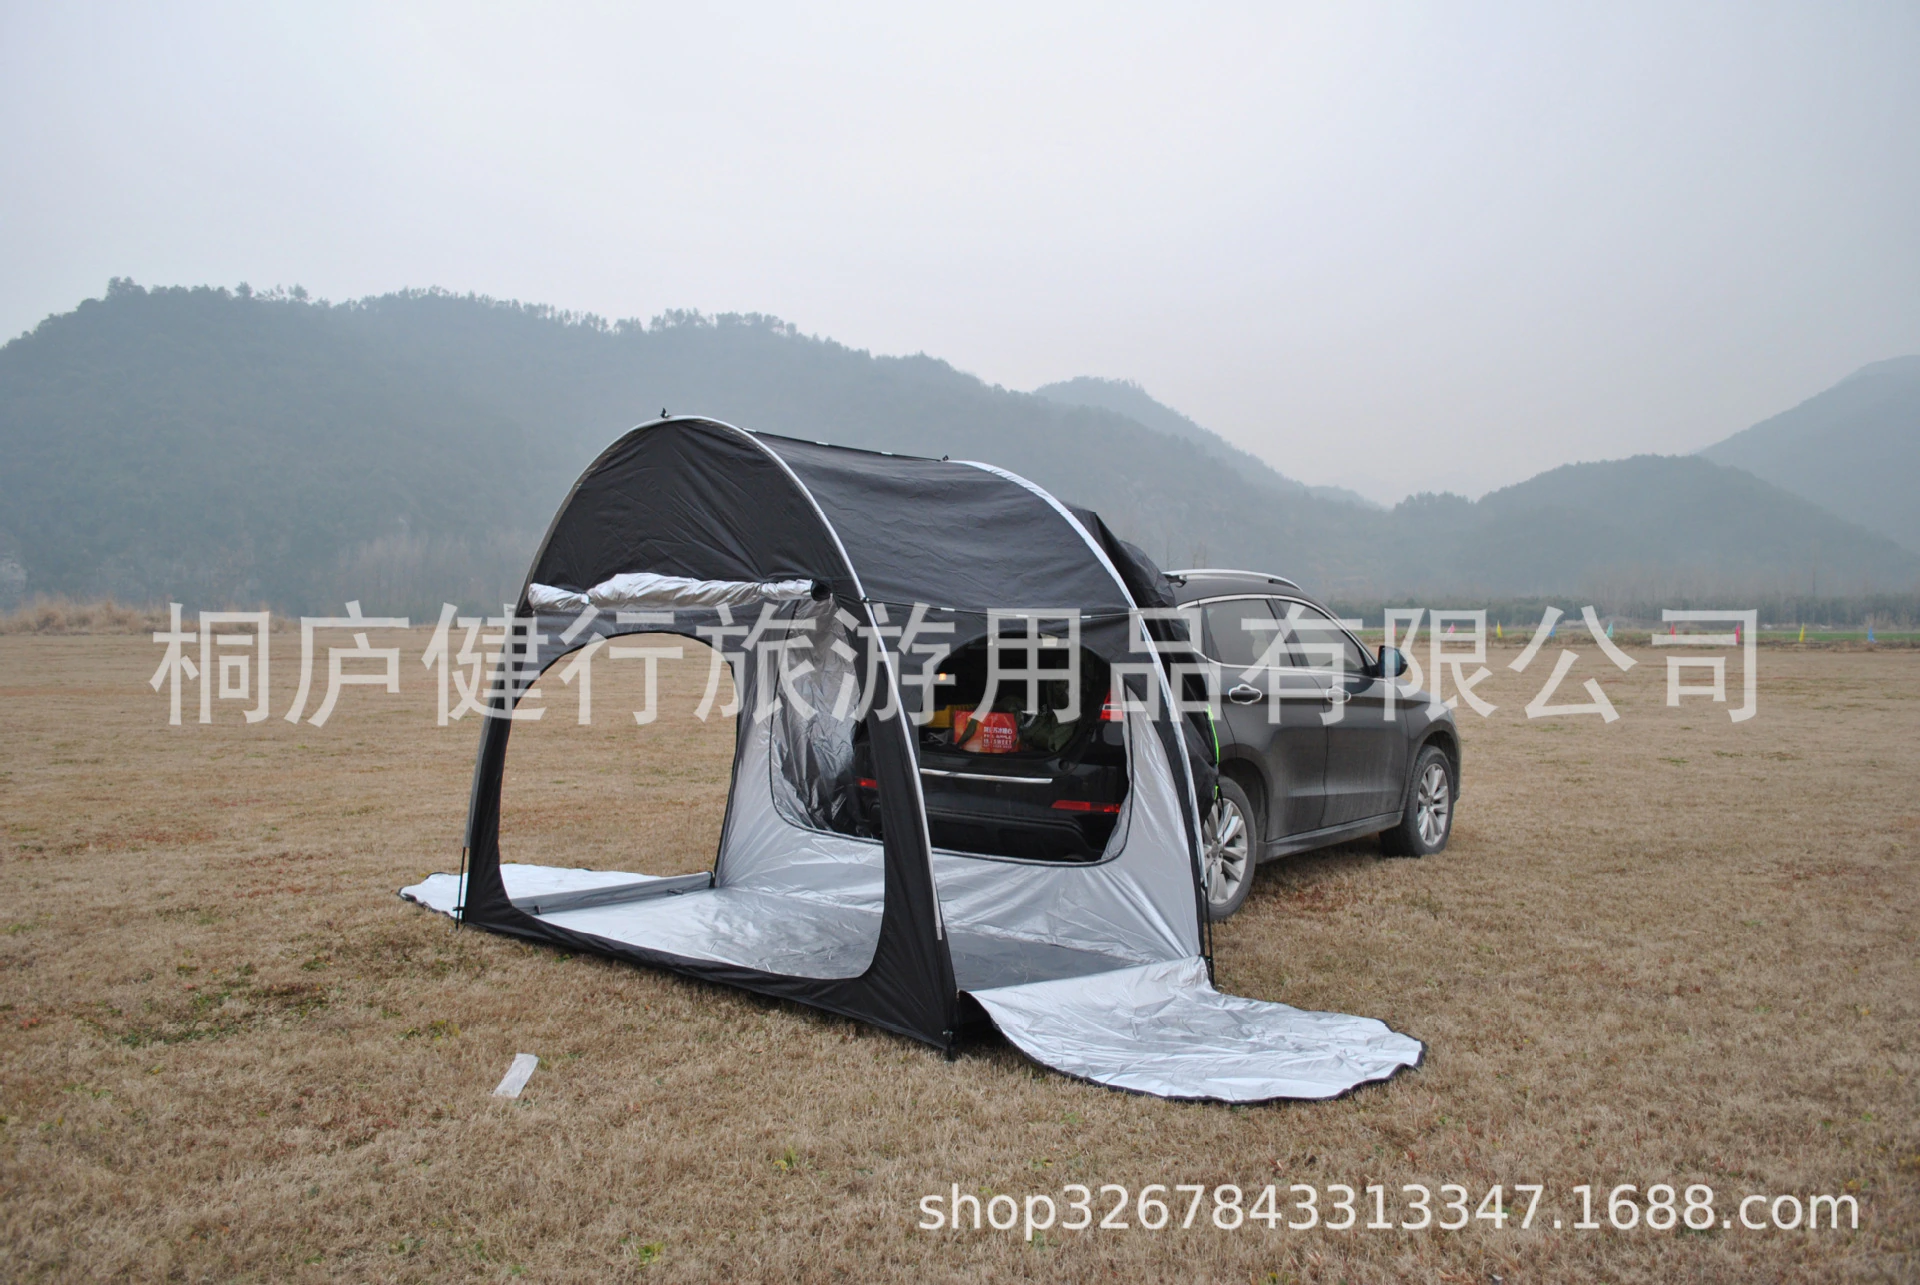 Cheap Goat Tents Outdoor Car Trunk Tent Sunshade Rainproof Tailgate Shade Awning Tent For SUV Car Self Driving Tour Barbecue Camping Tool   